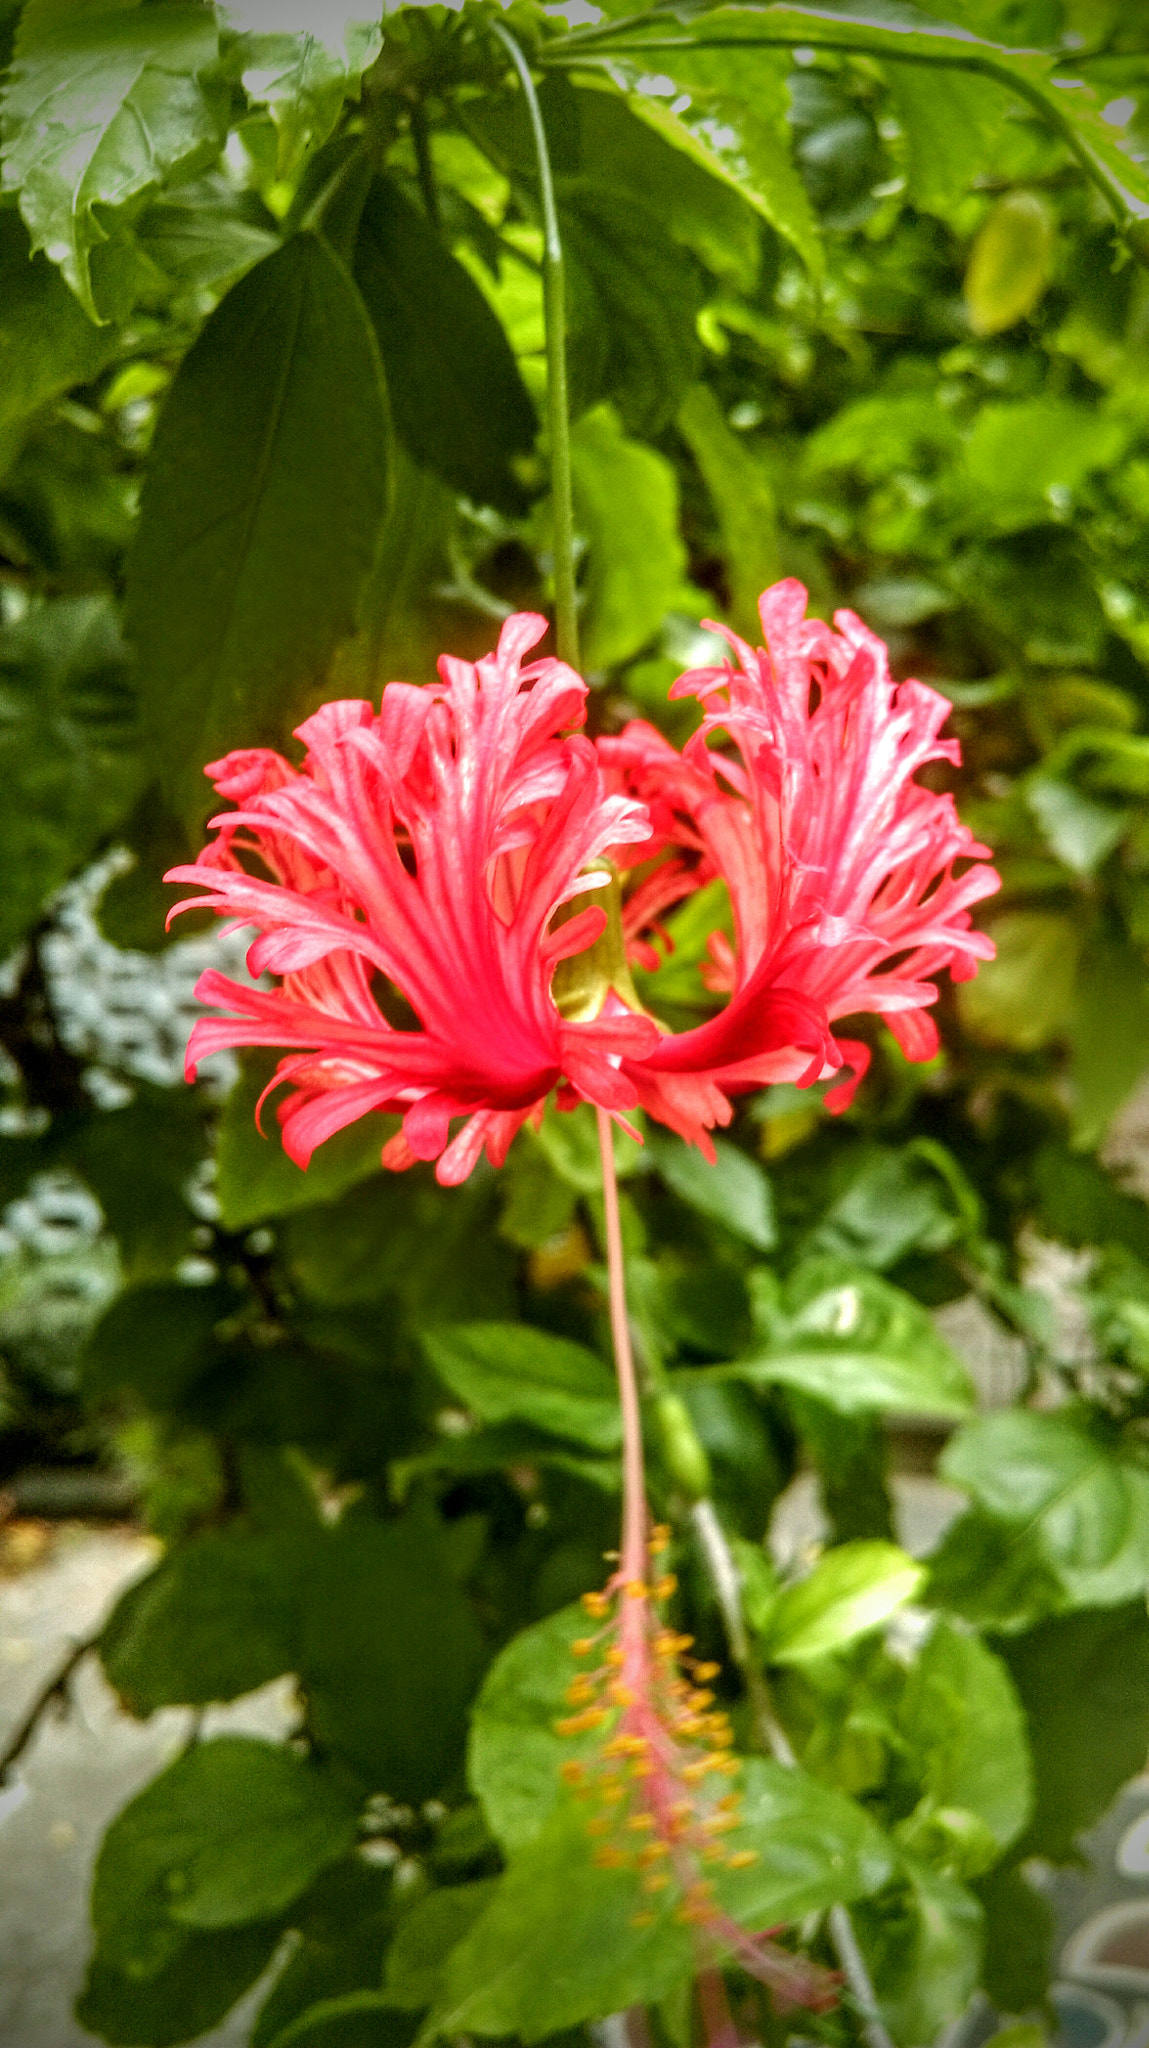 HTC DESIRE 820 DUAL SIM sample photo. Hibiscus flower (red) photography